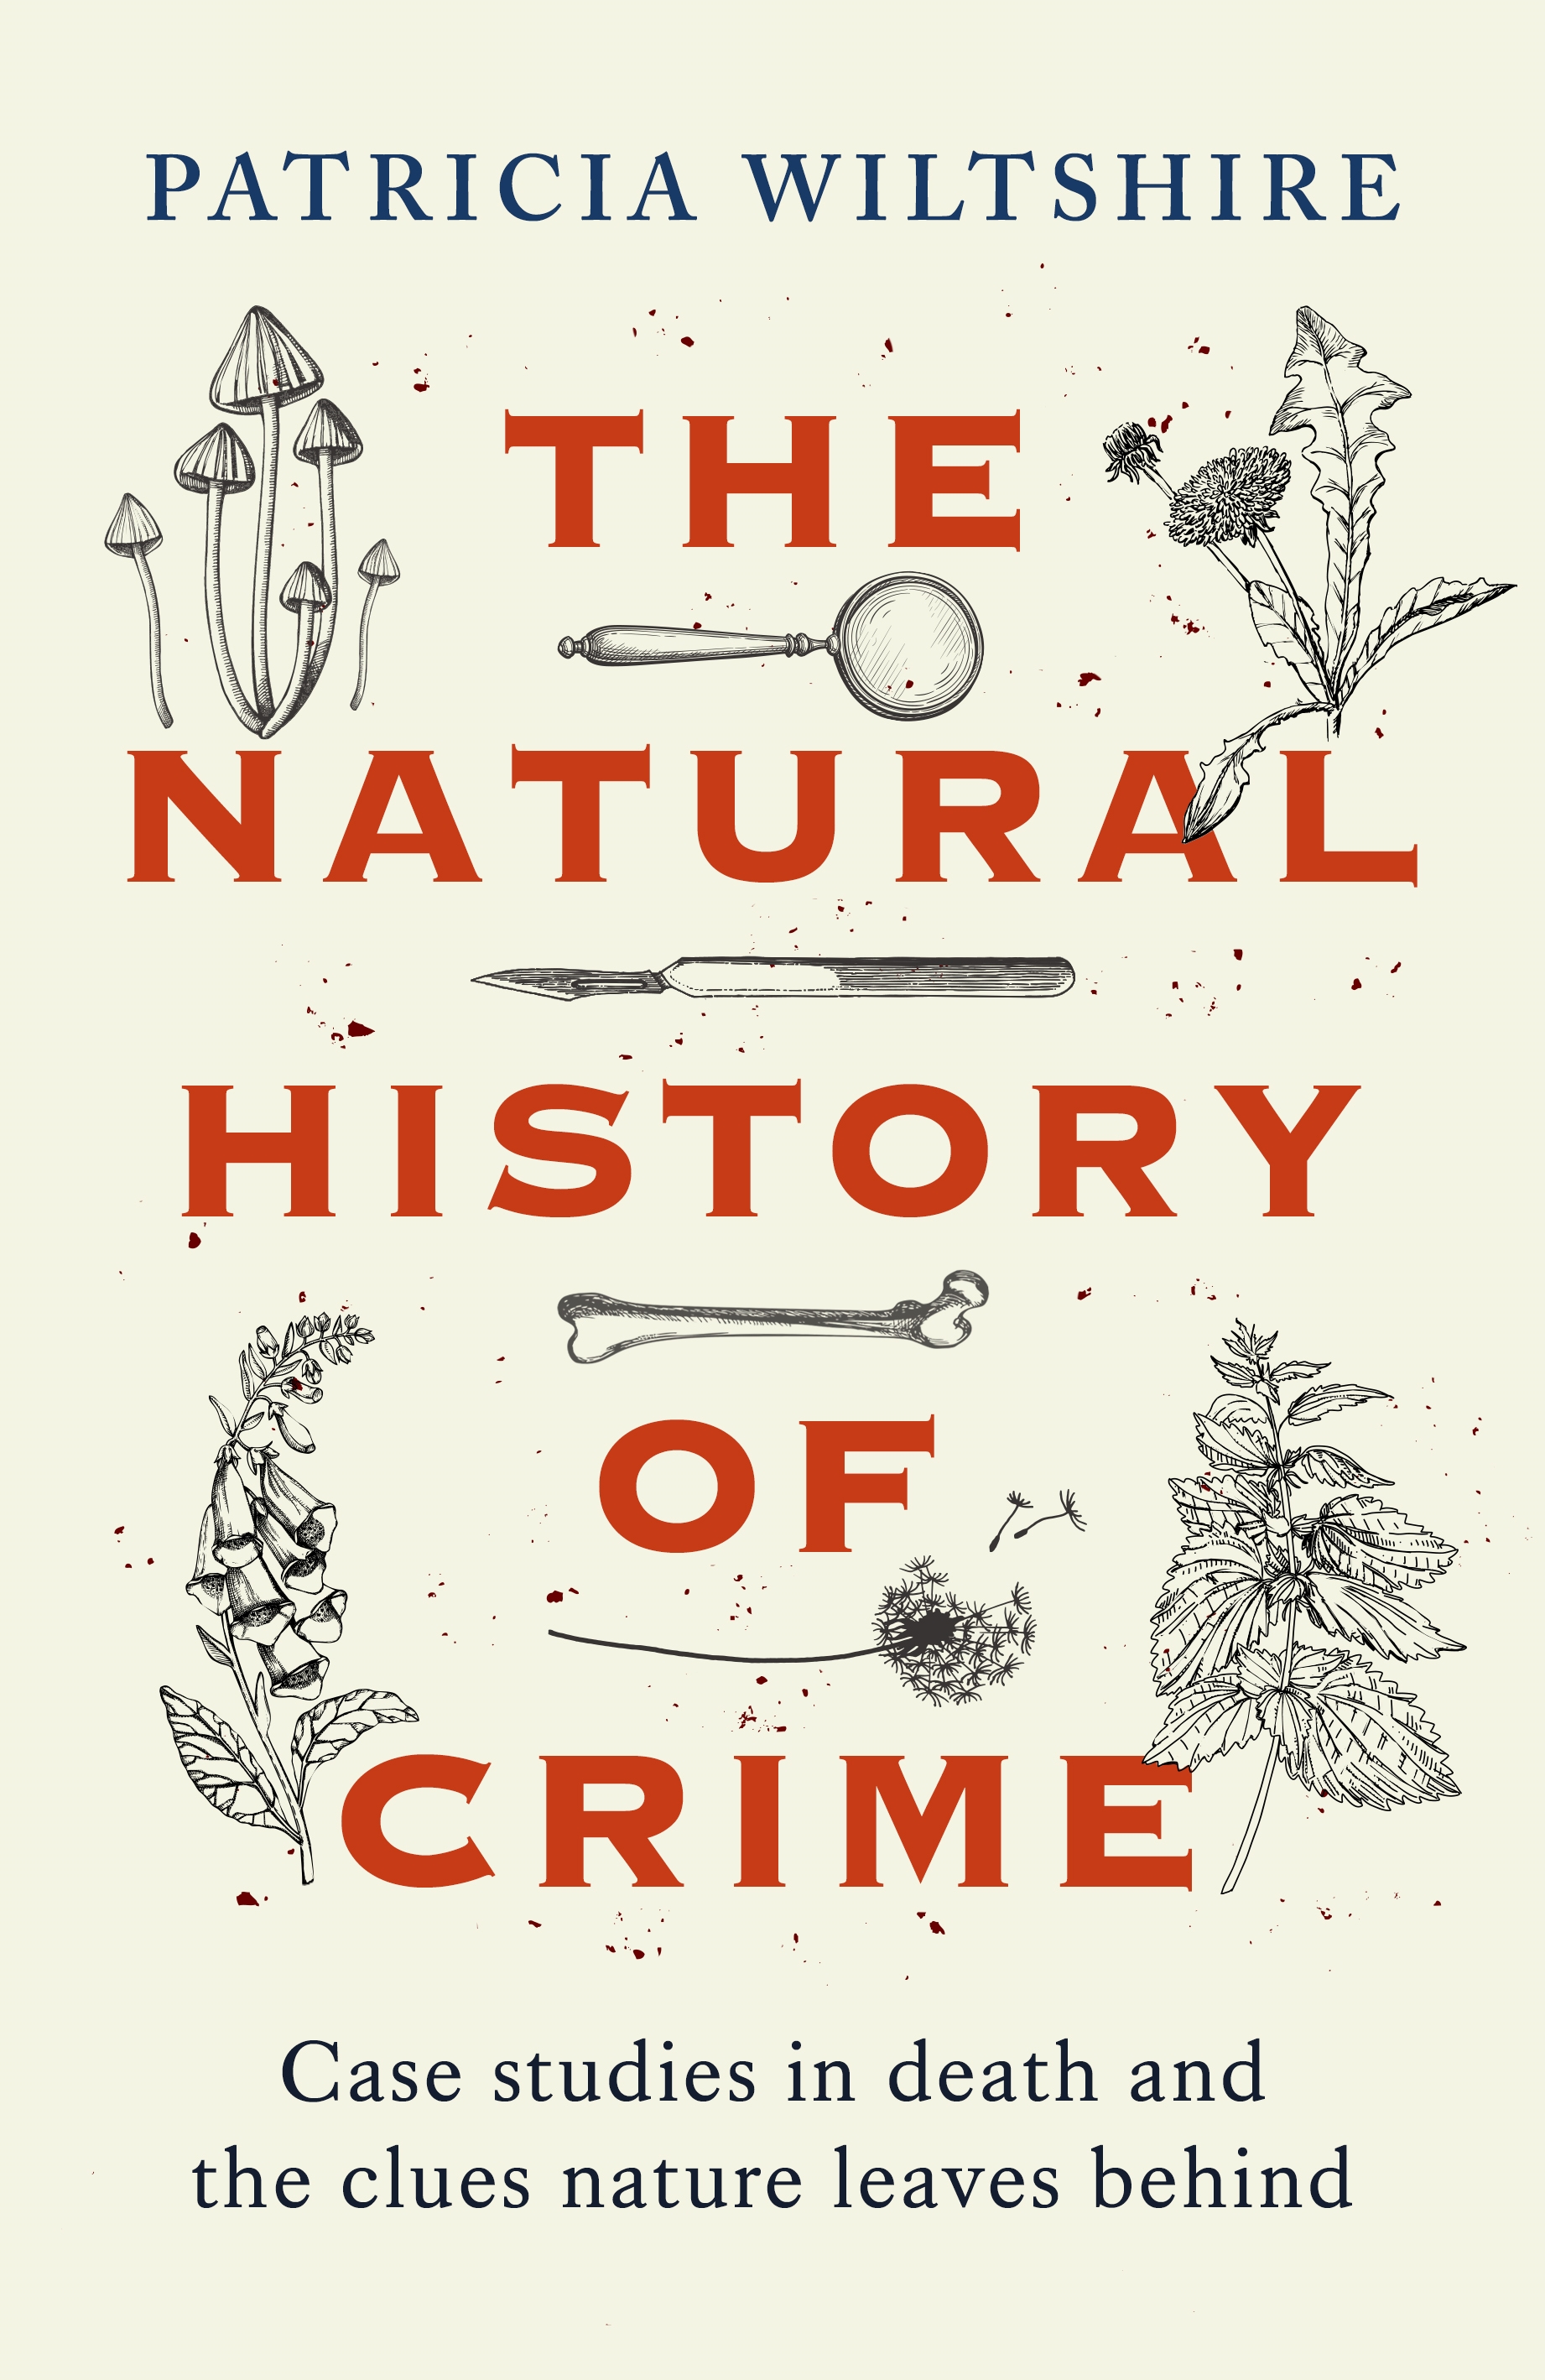 The Natural History of Crime by Patricia Wiltshire is published by John Blake tomorrow (March 14), £22